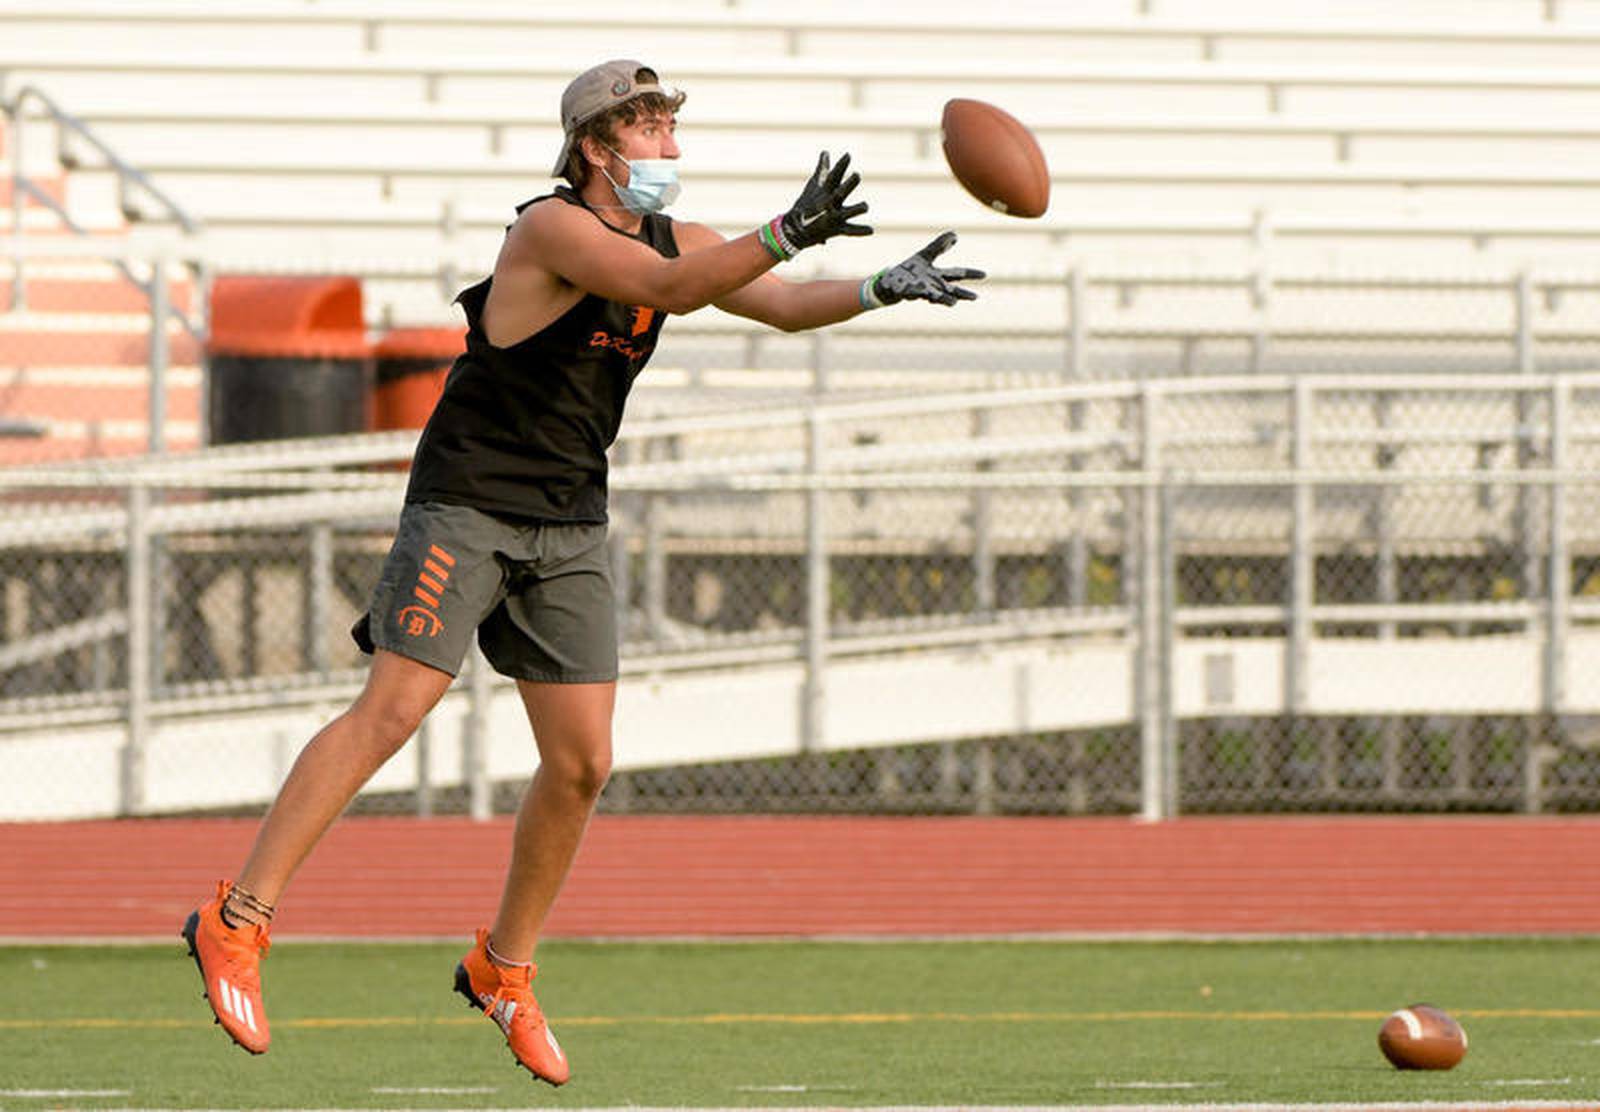 Photos: DeKalb football gets going for practice ahead of spring season – Shaw Local